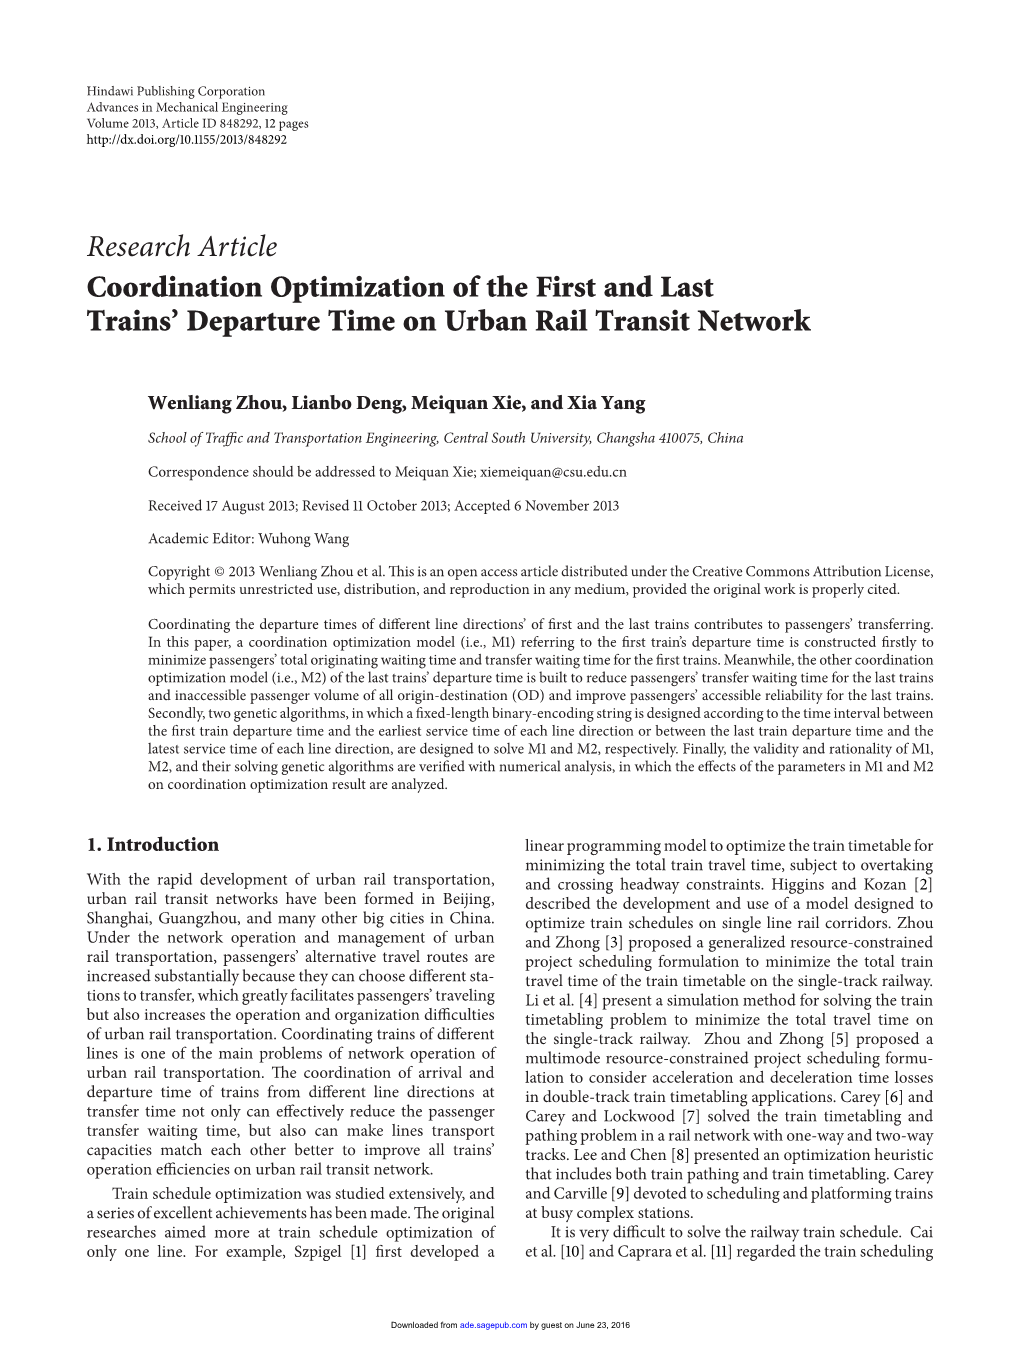 Research Article Coordination Optimization of the First and Last Trains’ Departure Time on Urban Rail Transit Network